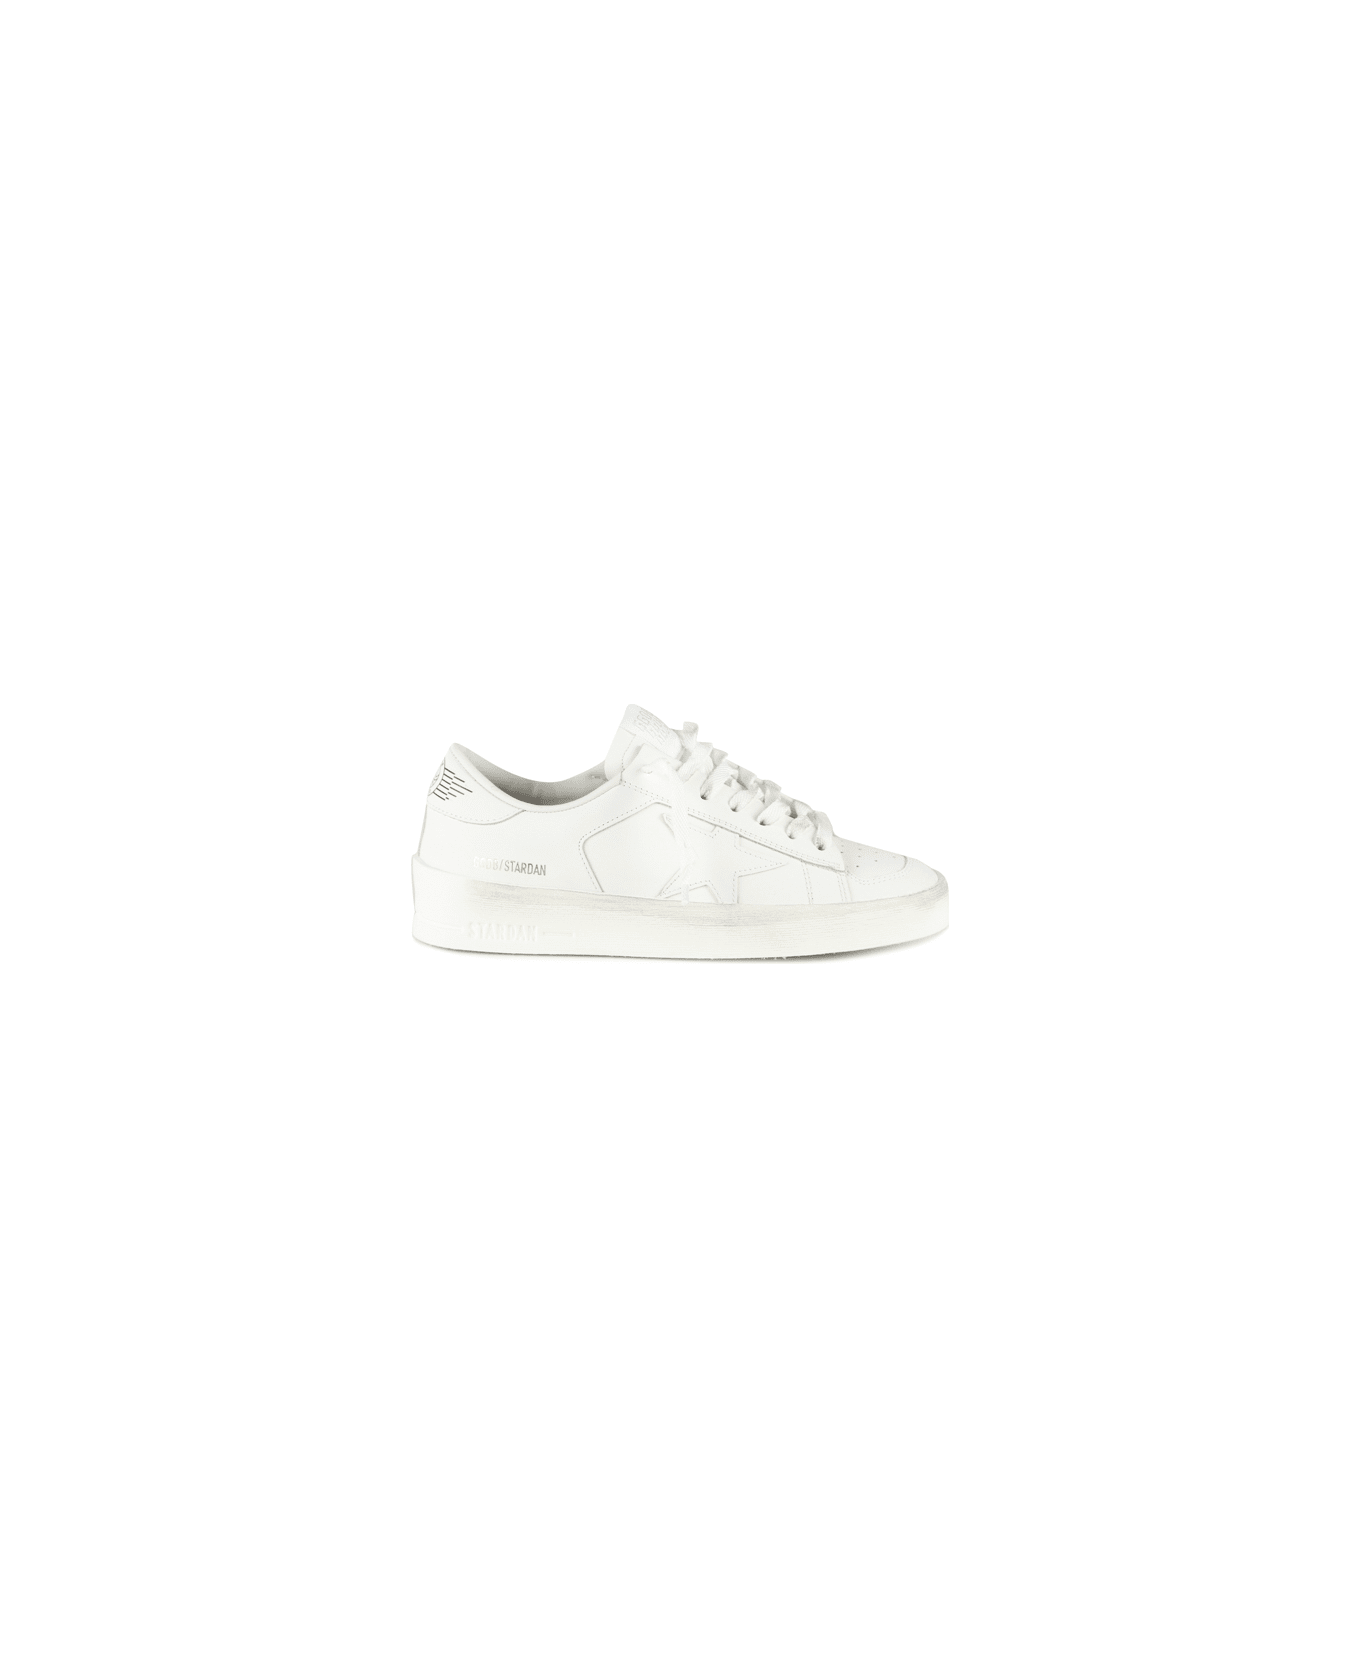 Golden Goose Stardan Sneakers In Total White Leather - White